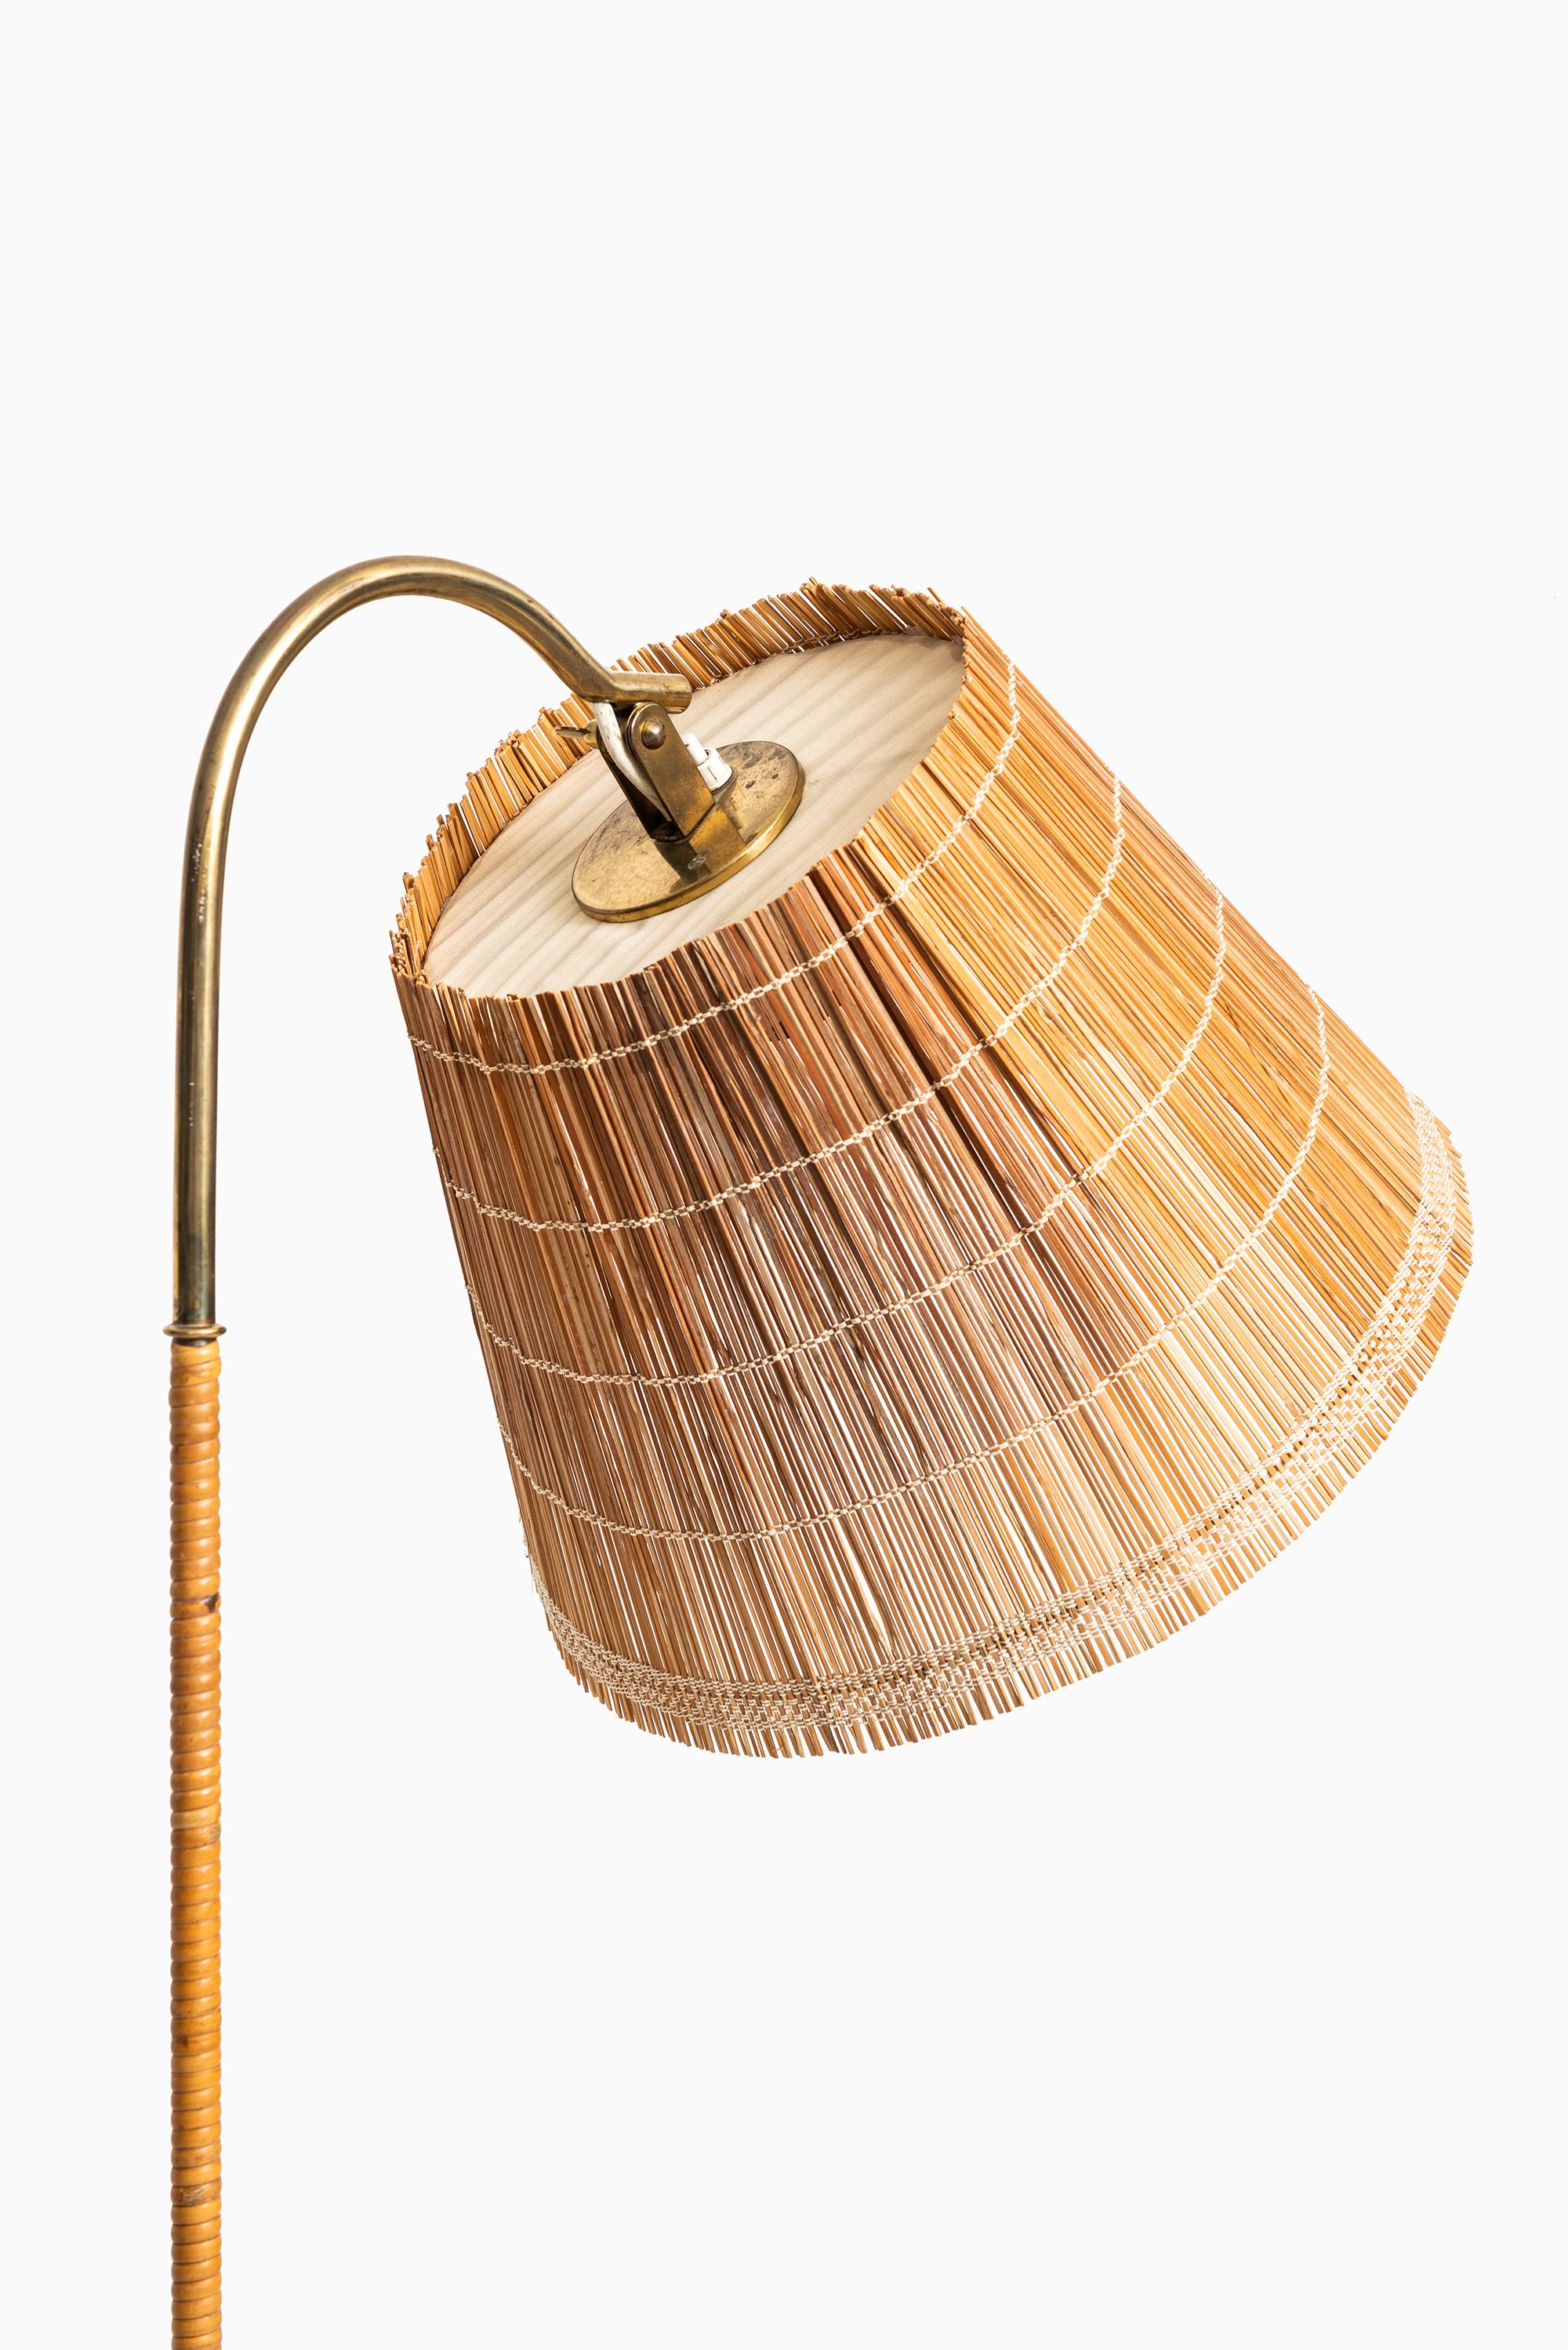 Paavo Tynell Floor Lamps Produced by Taito Oy in Finland 1